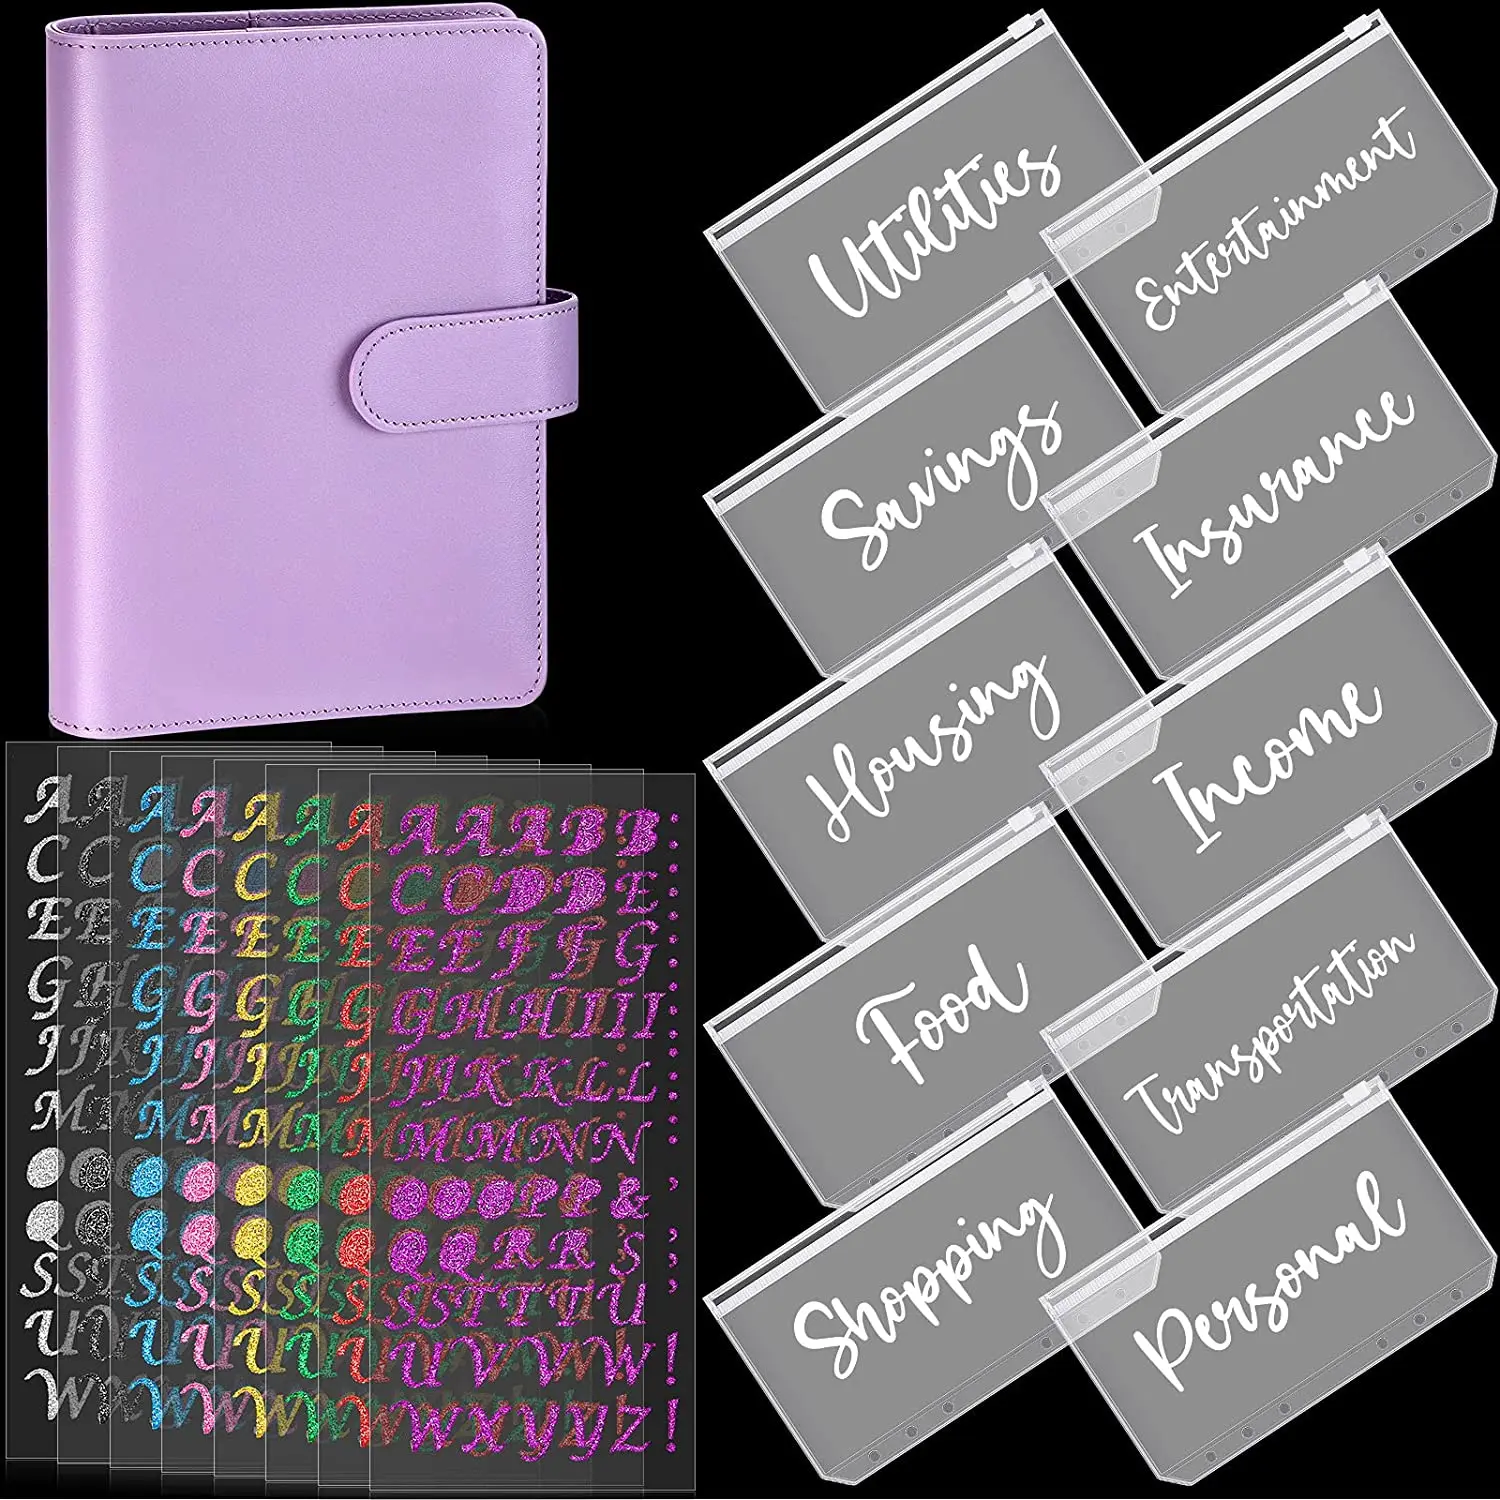 A6 PU Leather Notebook Binder Budget Planner Cover with 12 Pieces Personal Cash Binder Budget Envelopes and 8 Alphabet Stickers